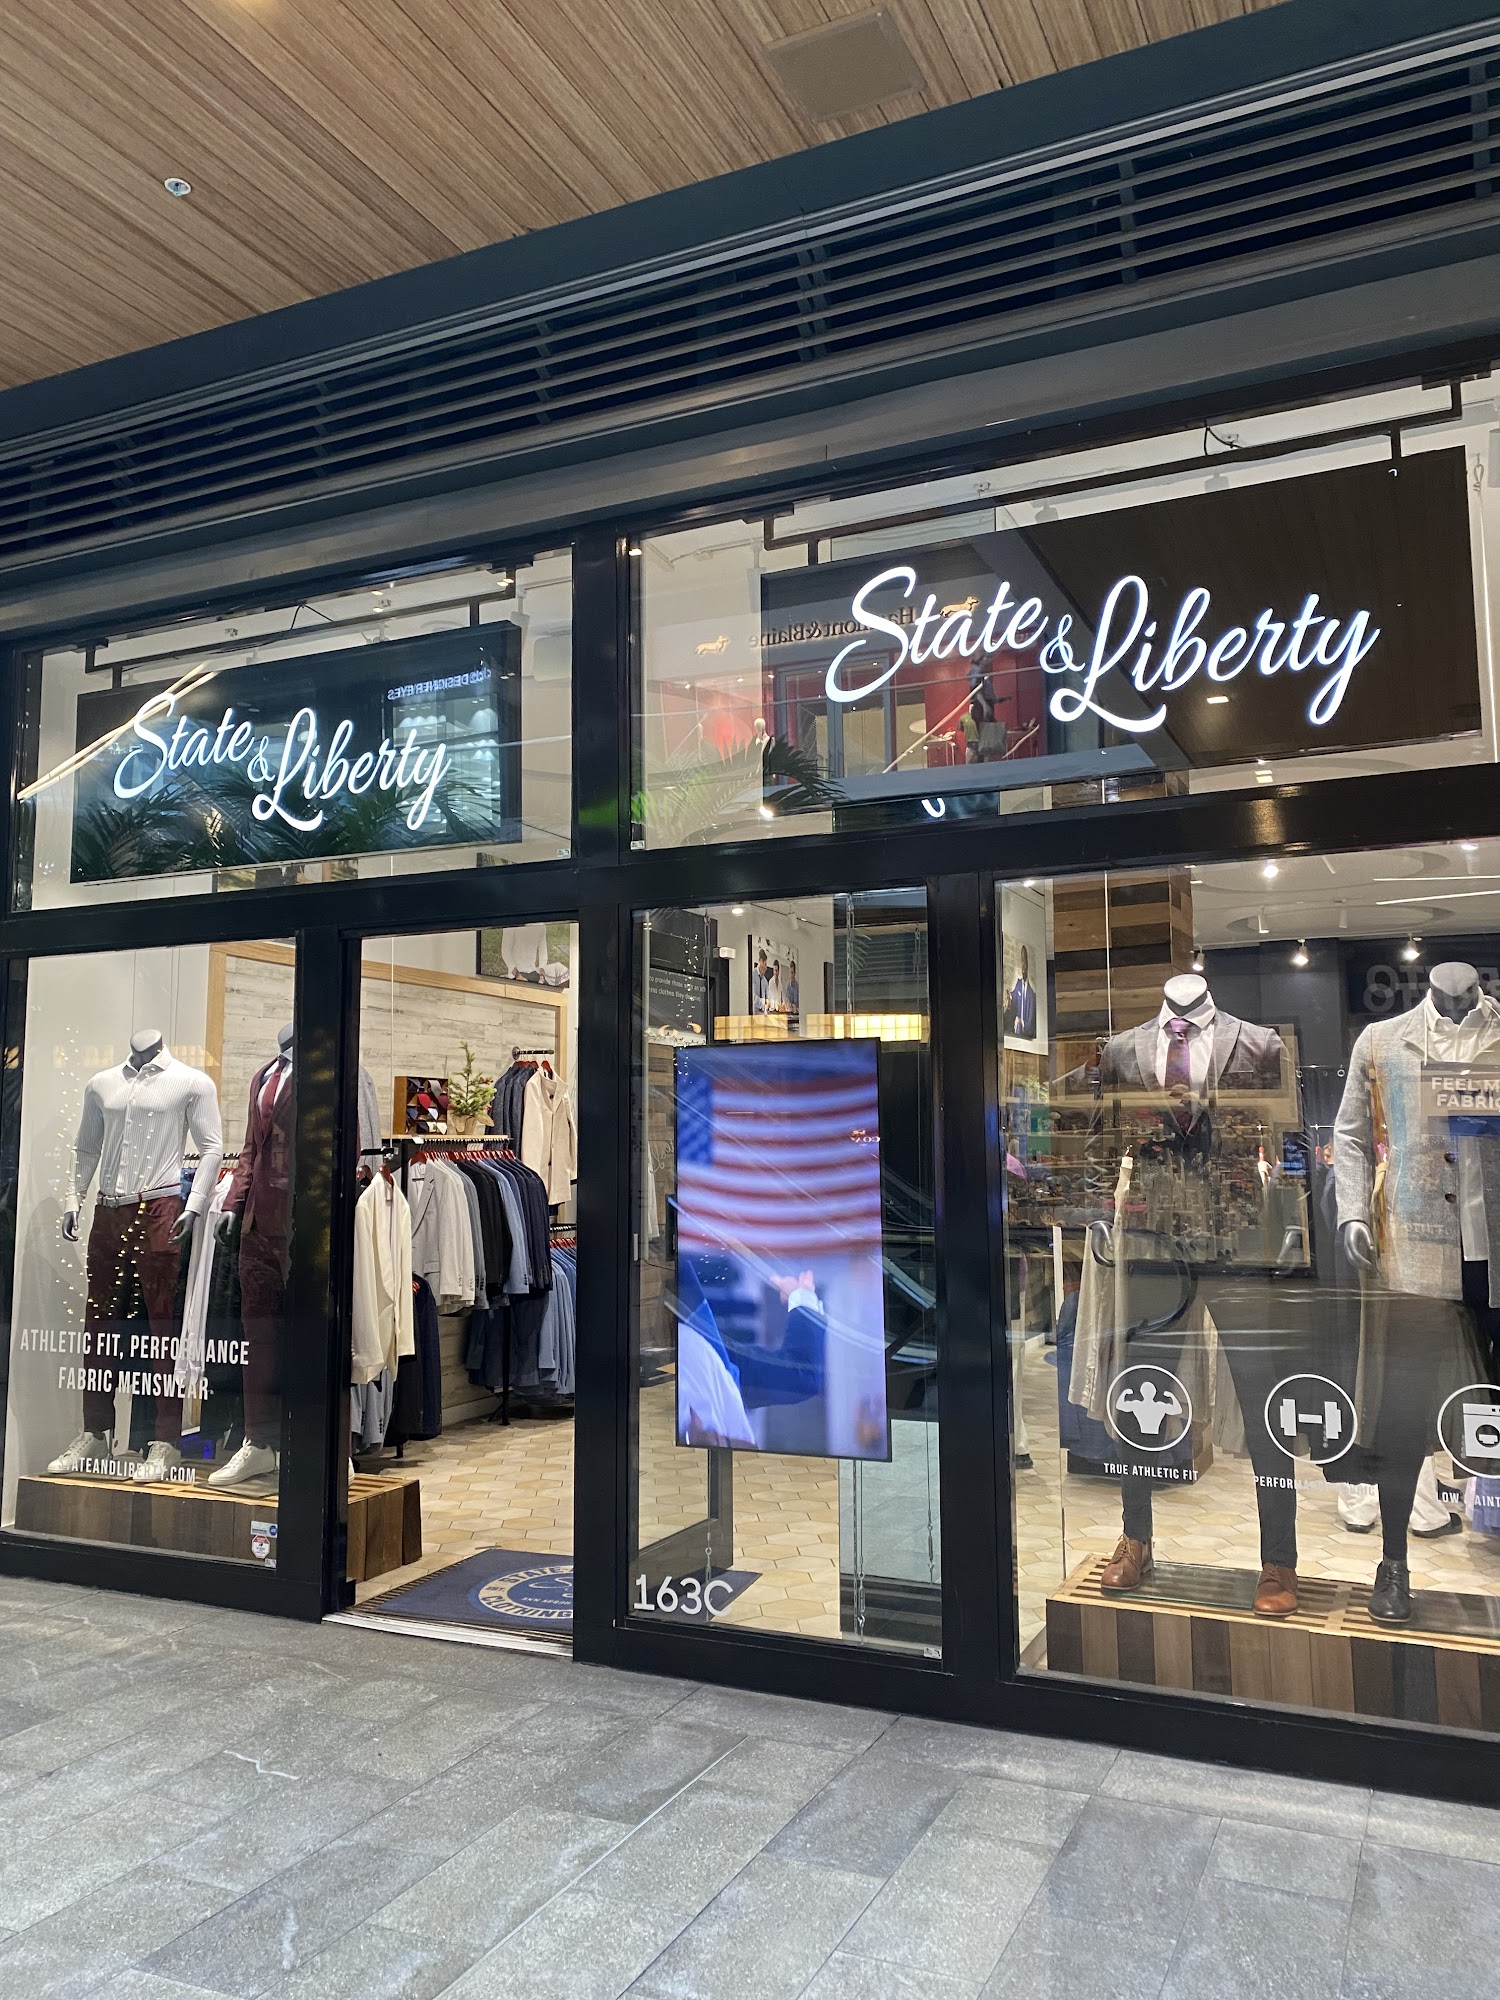 State & Liberty Clothing